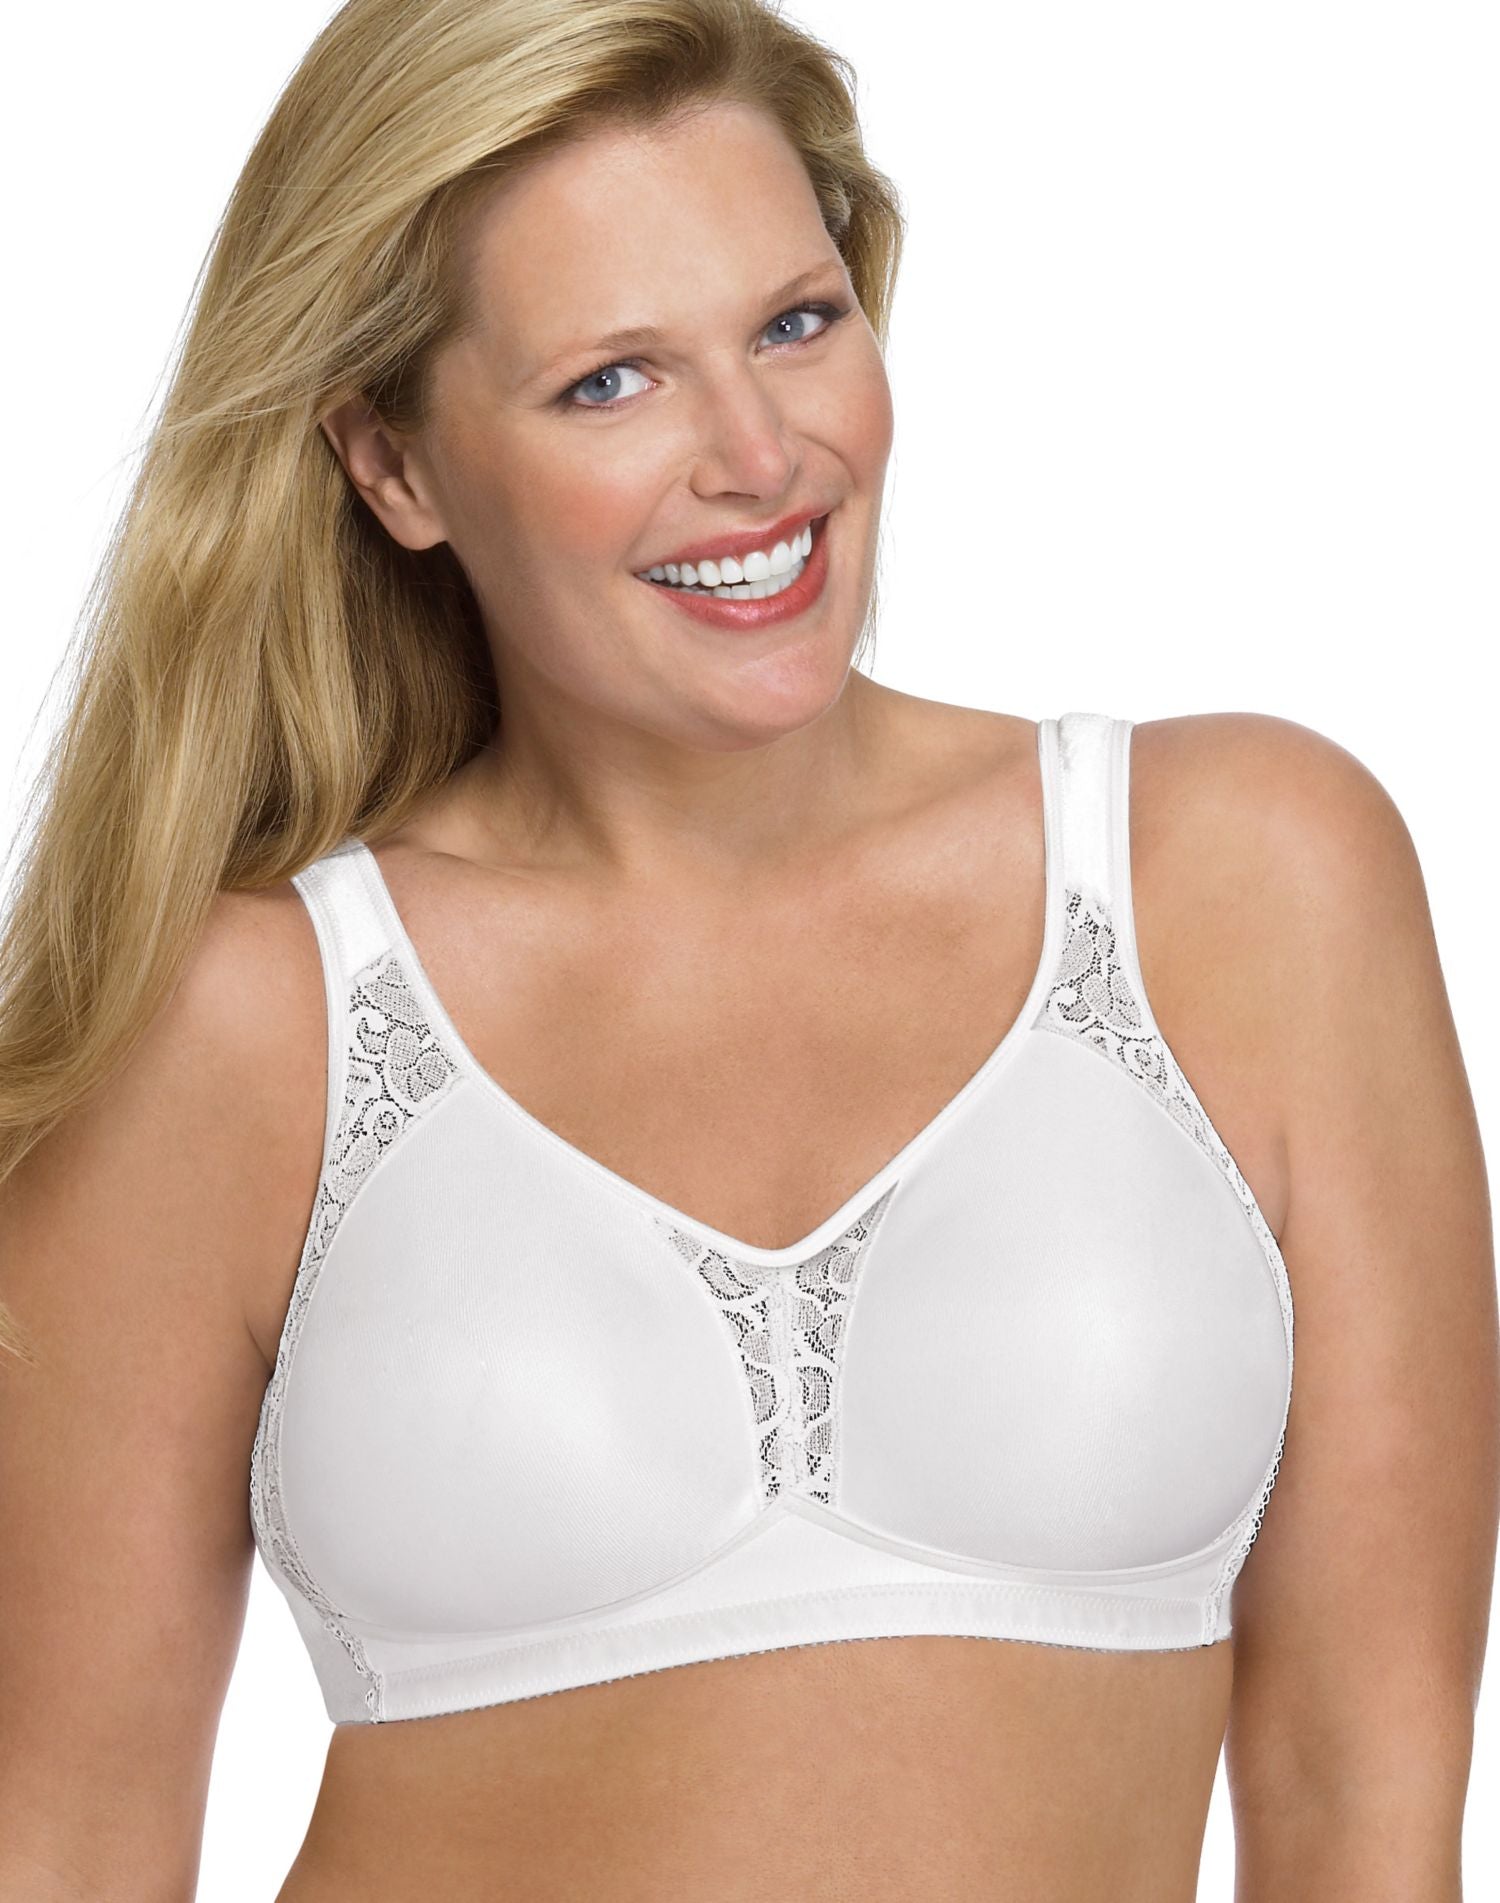 Playtex wire free comfort and lace NEW white brassiere Sz 44DD